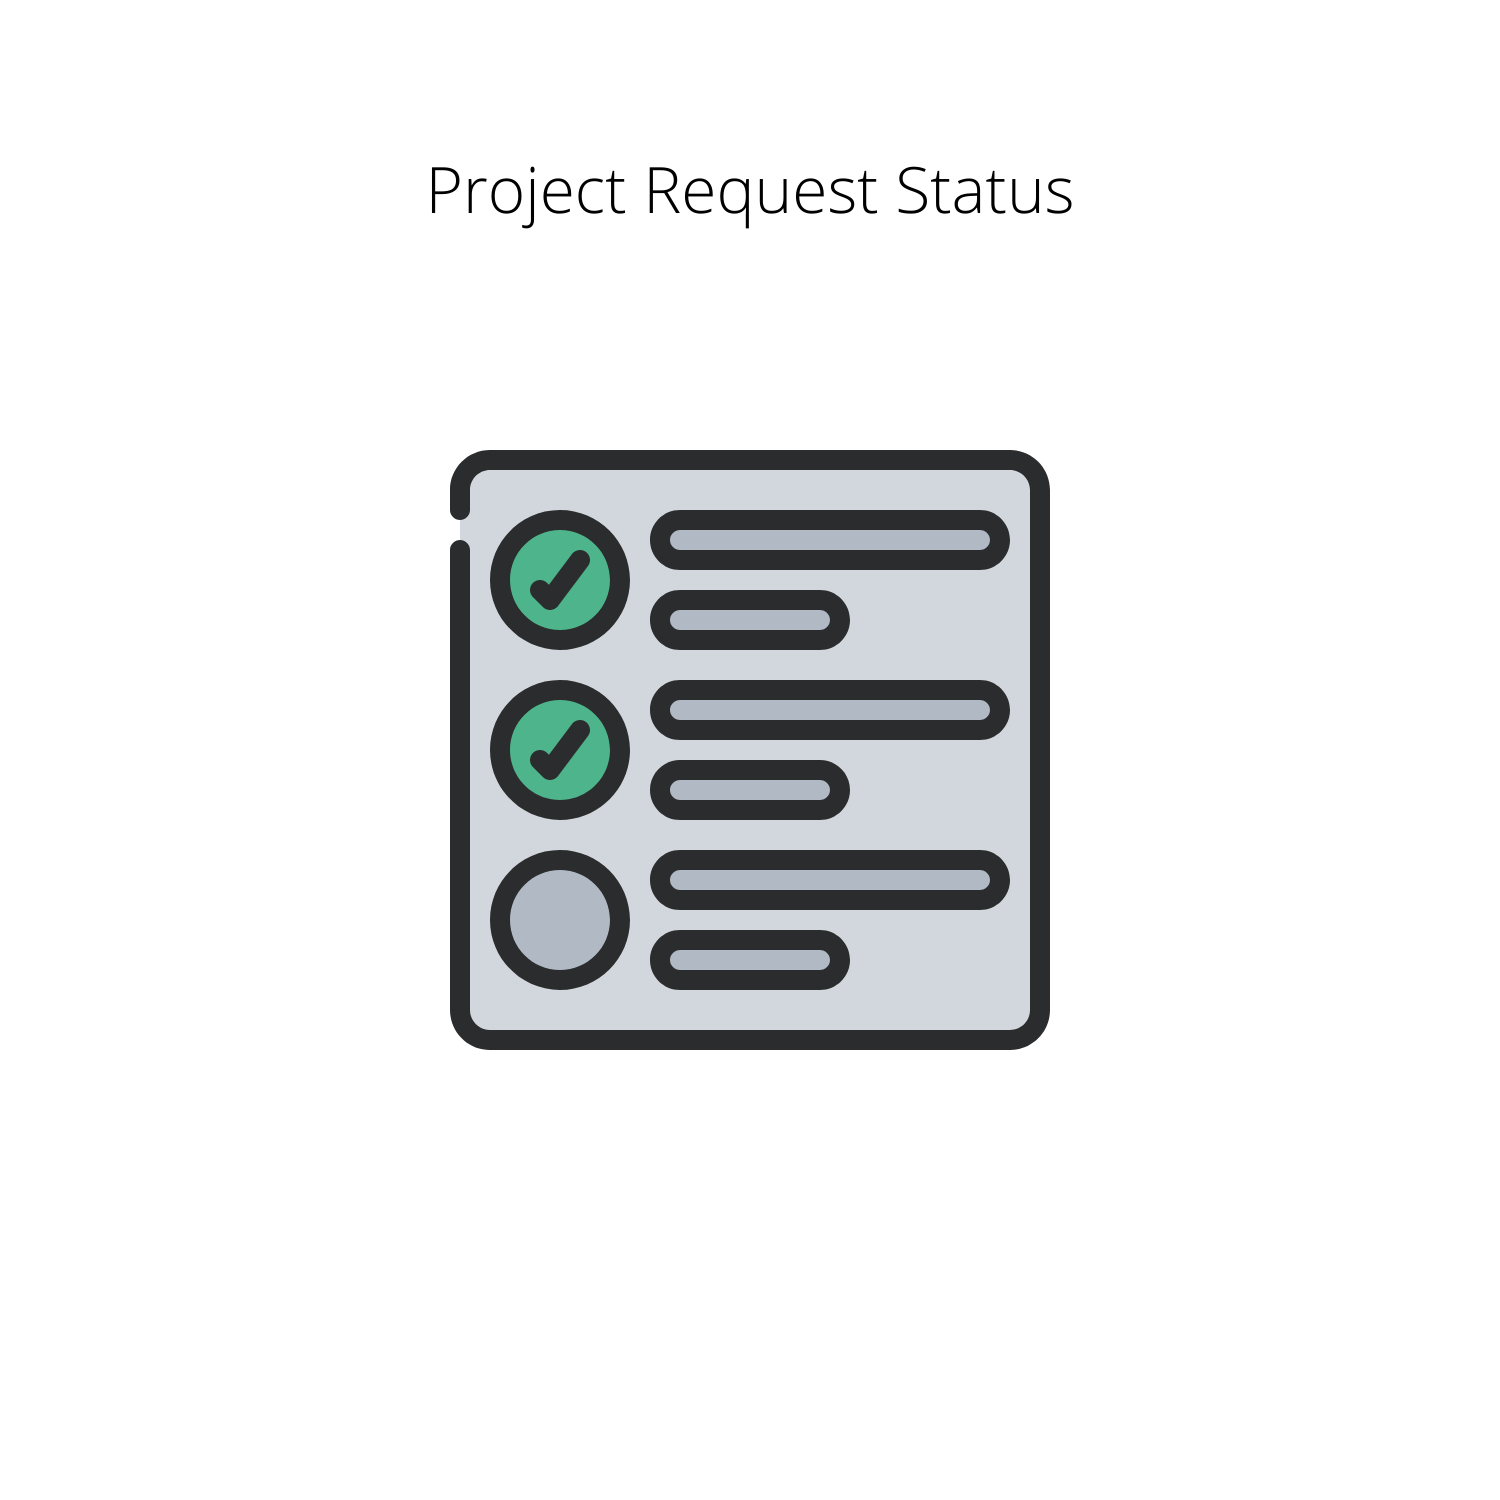 Project Request Status